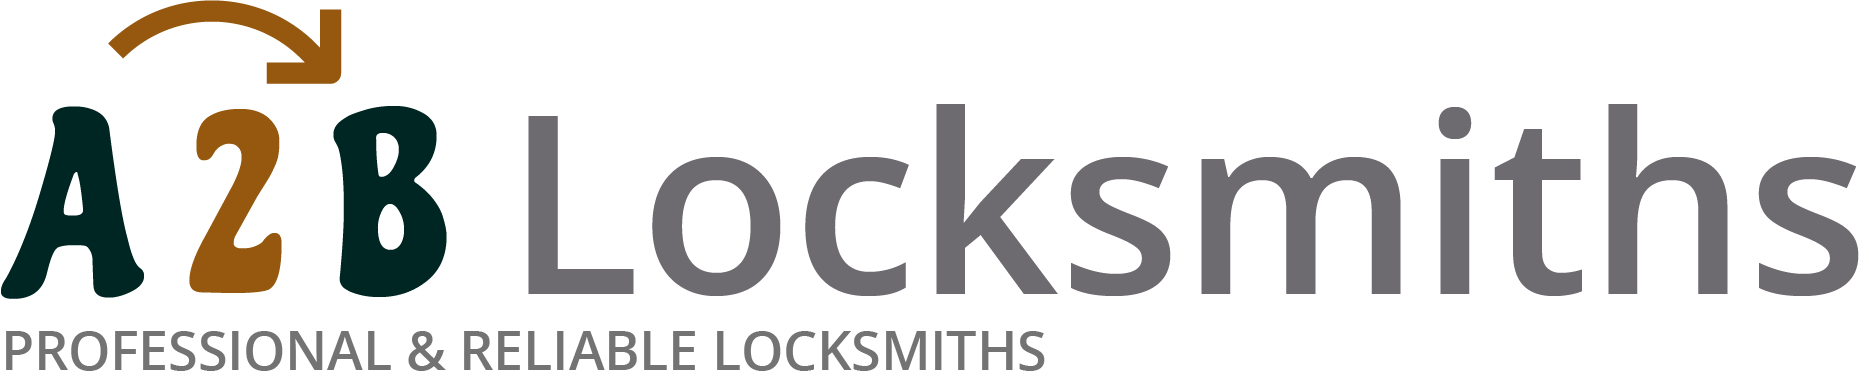 If you are locked out of house in Bexhill, our 24/7 local emergency locksmith services can help you.